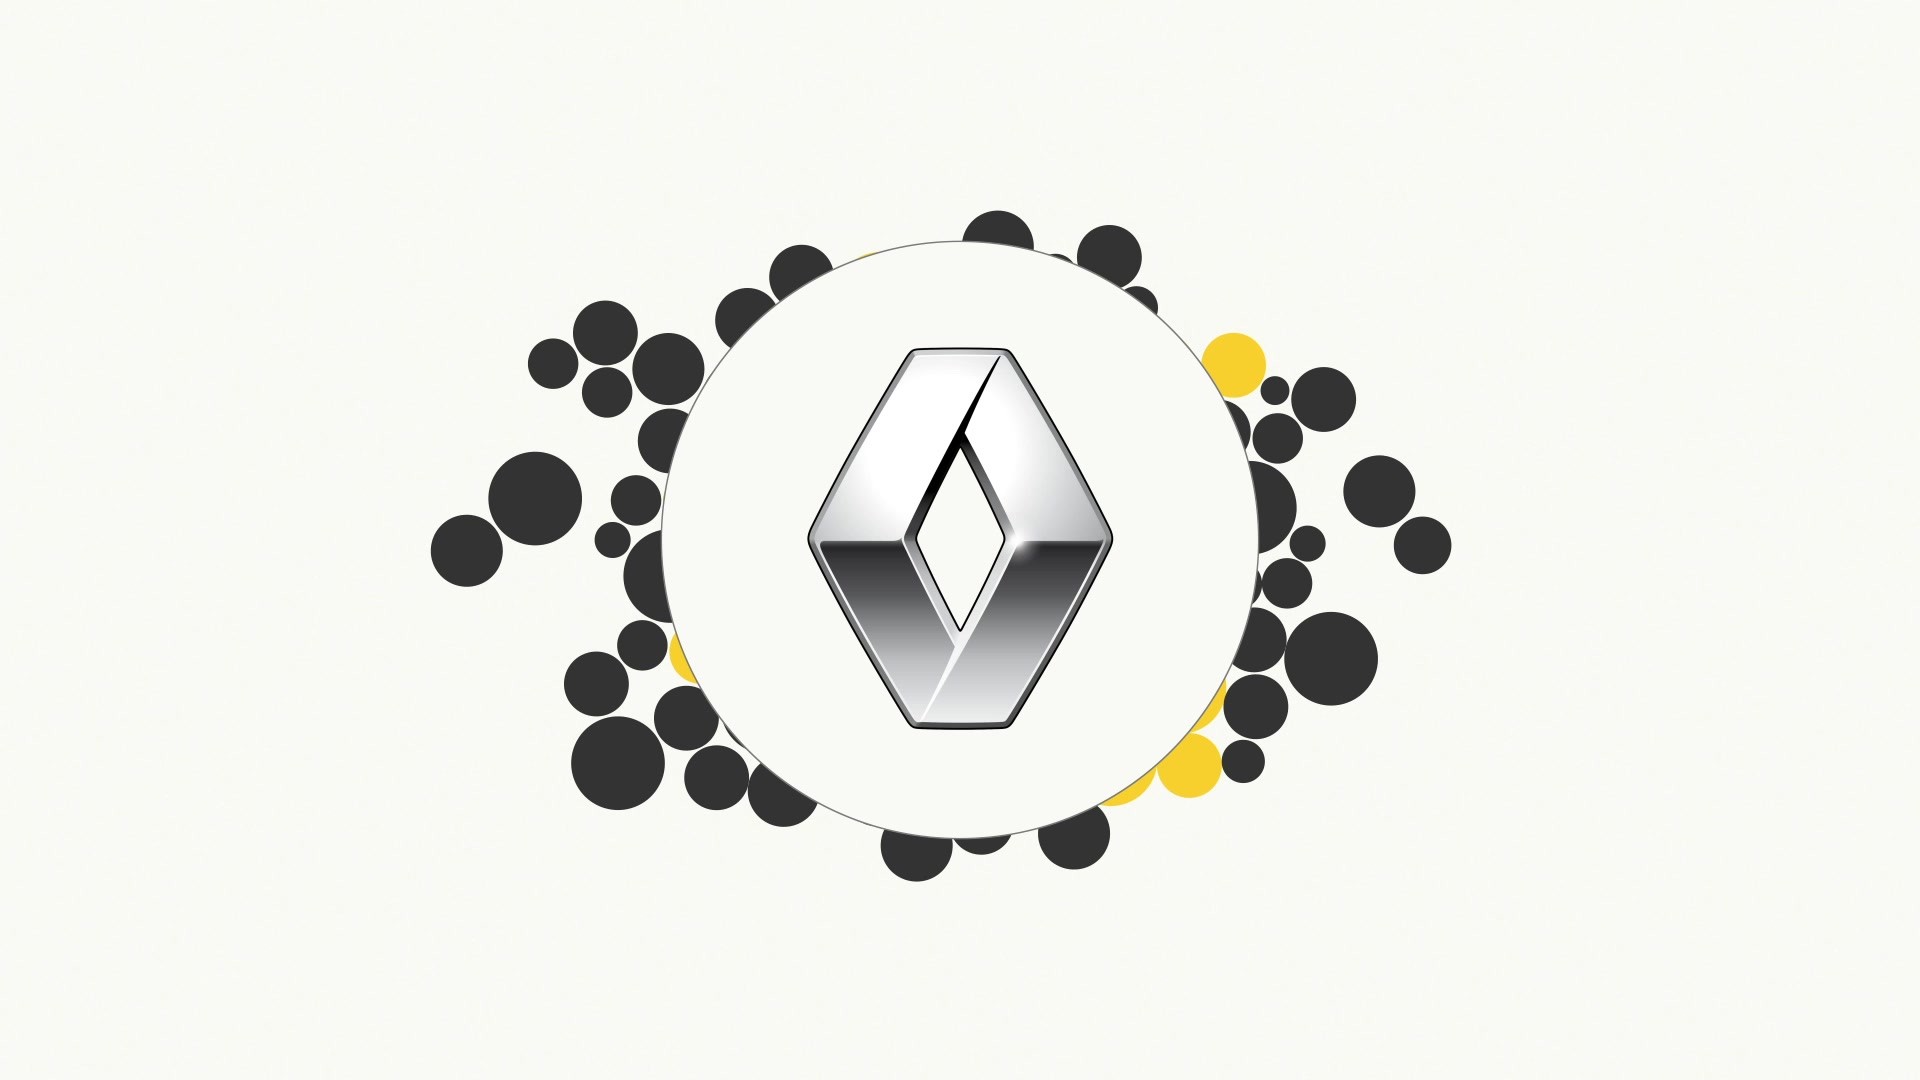 Renault DCO: Marketing to Individuals